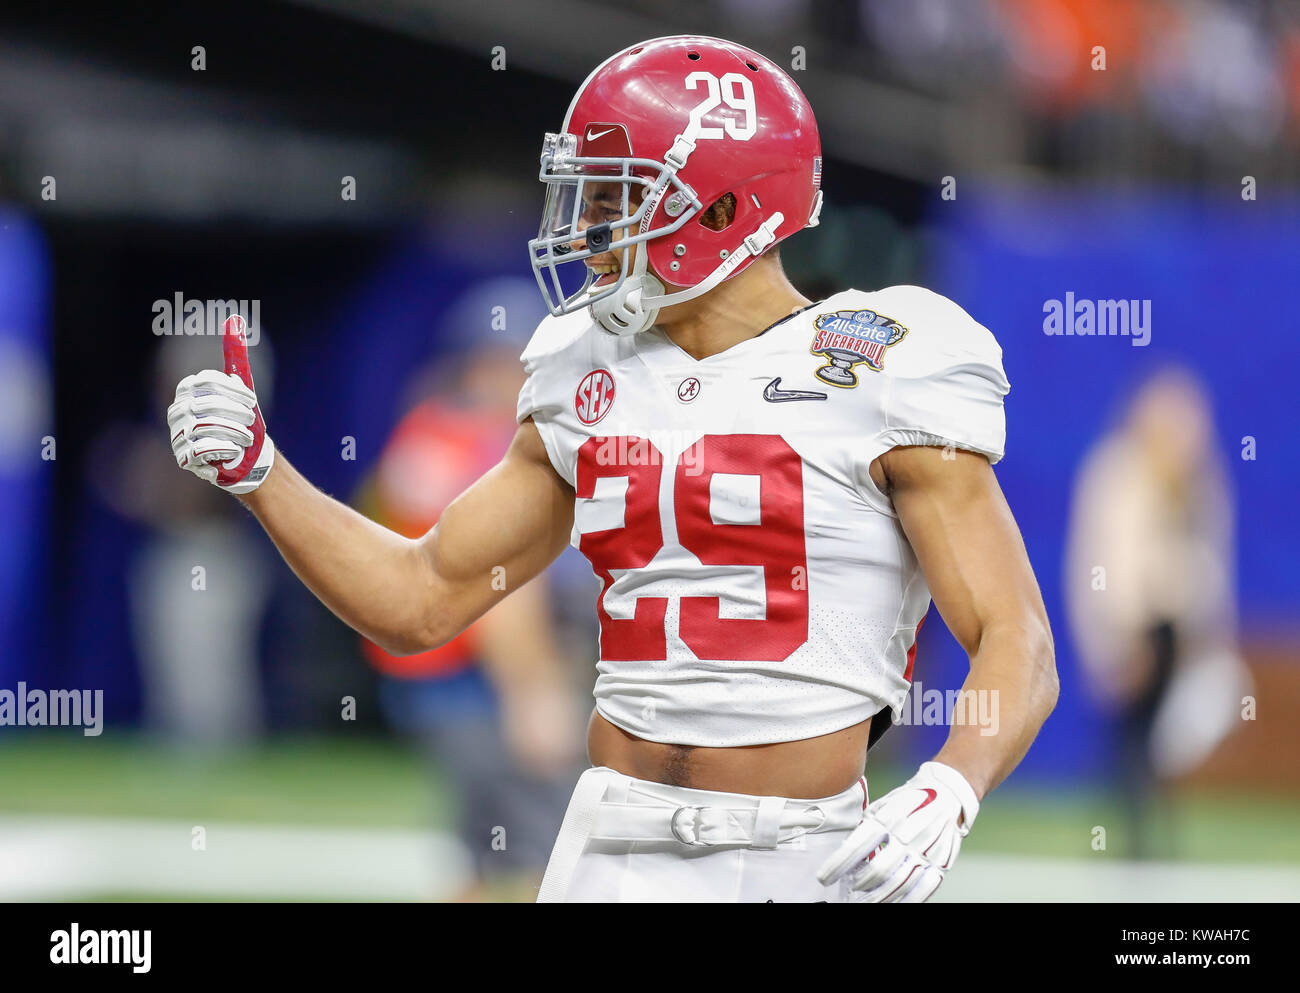 New Orleans, LA, USA. 1st Jan, 2018. Alabama DB Minkah Fitzpatrick smiles during warm-ups prior to the Allstate Sugar Bowl football game between the Clemson Tigers and the Alabama Crimson Tide at the Mercedes-Benz Supedome in New Orleans, LA. Kyle Okita/CSM/Alamy Live News Stock Photo